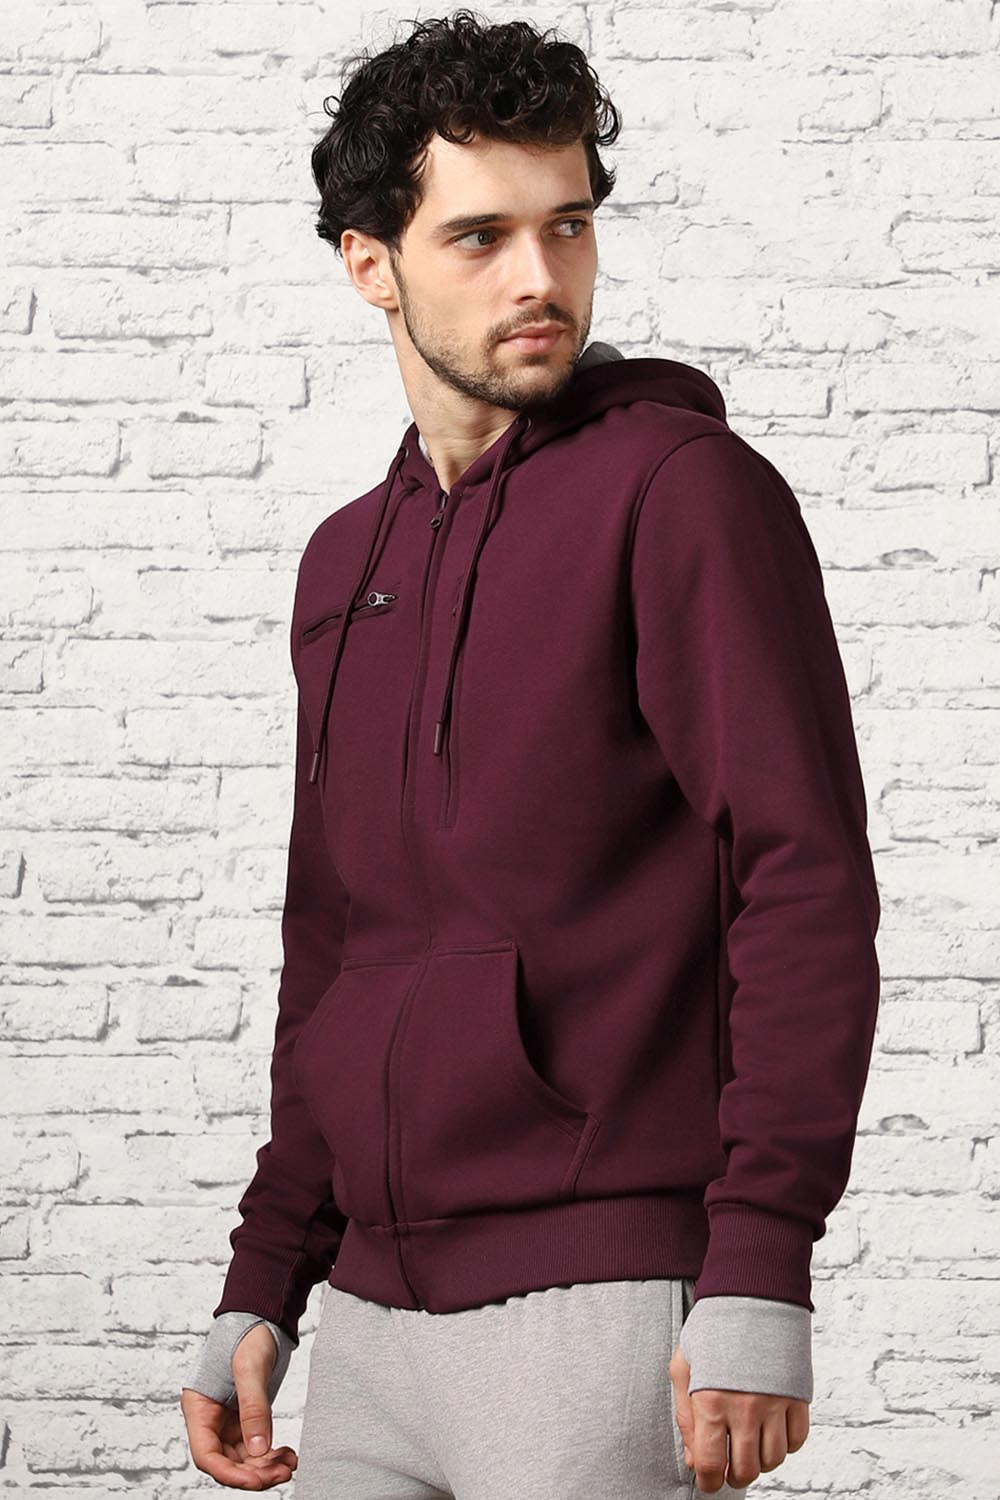 Nobero™ - The Ultimate Travel Hoodie Packed With 15 Never Seen Features